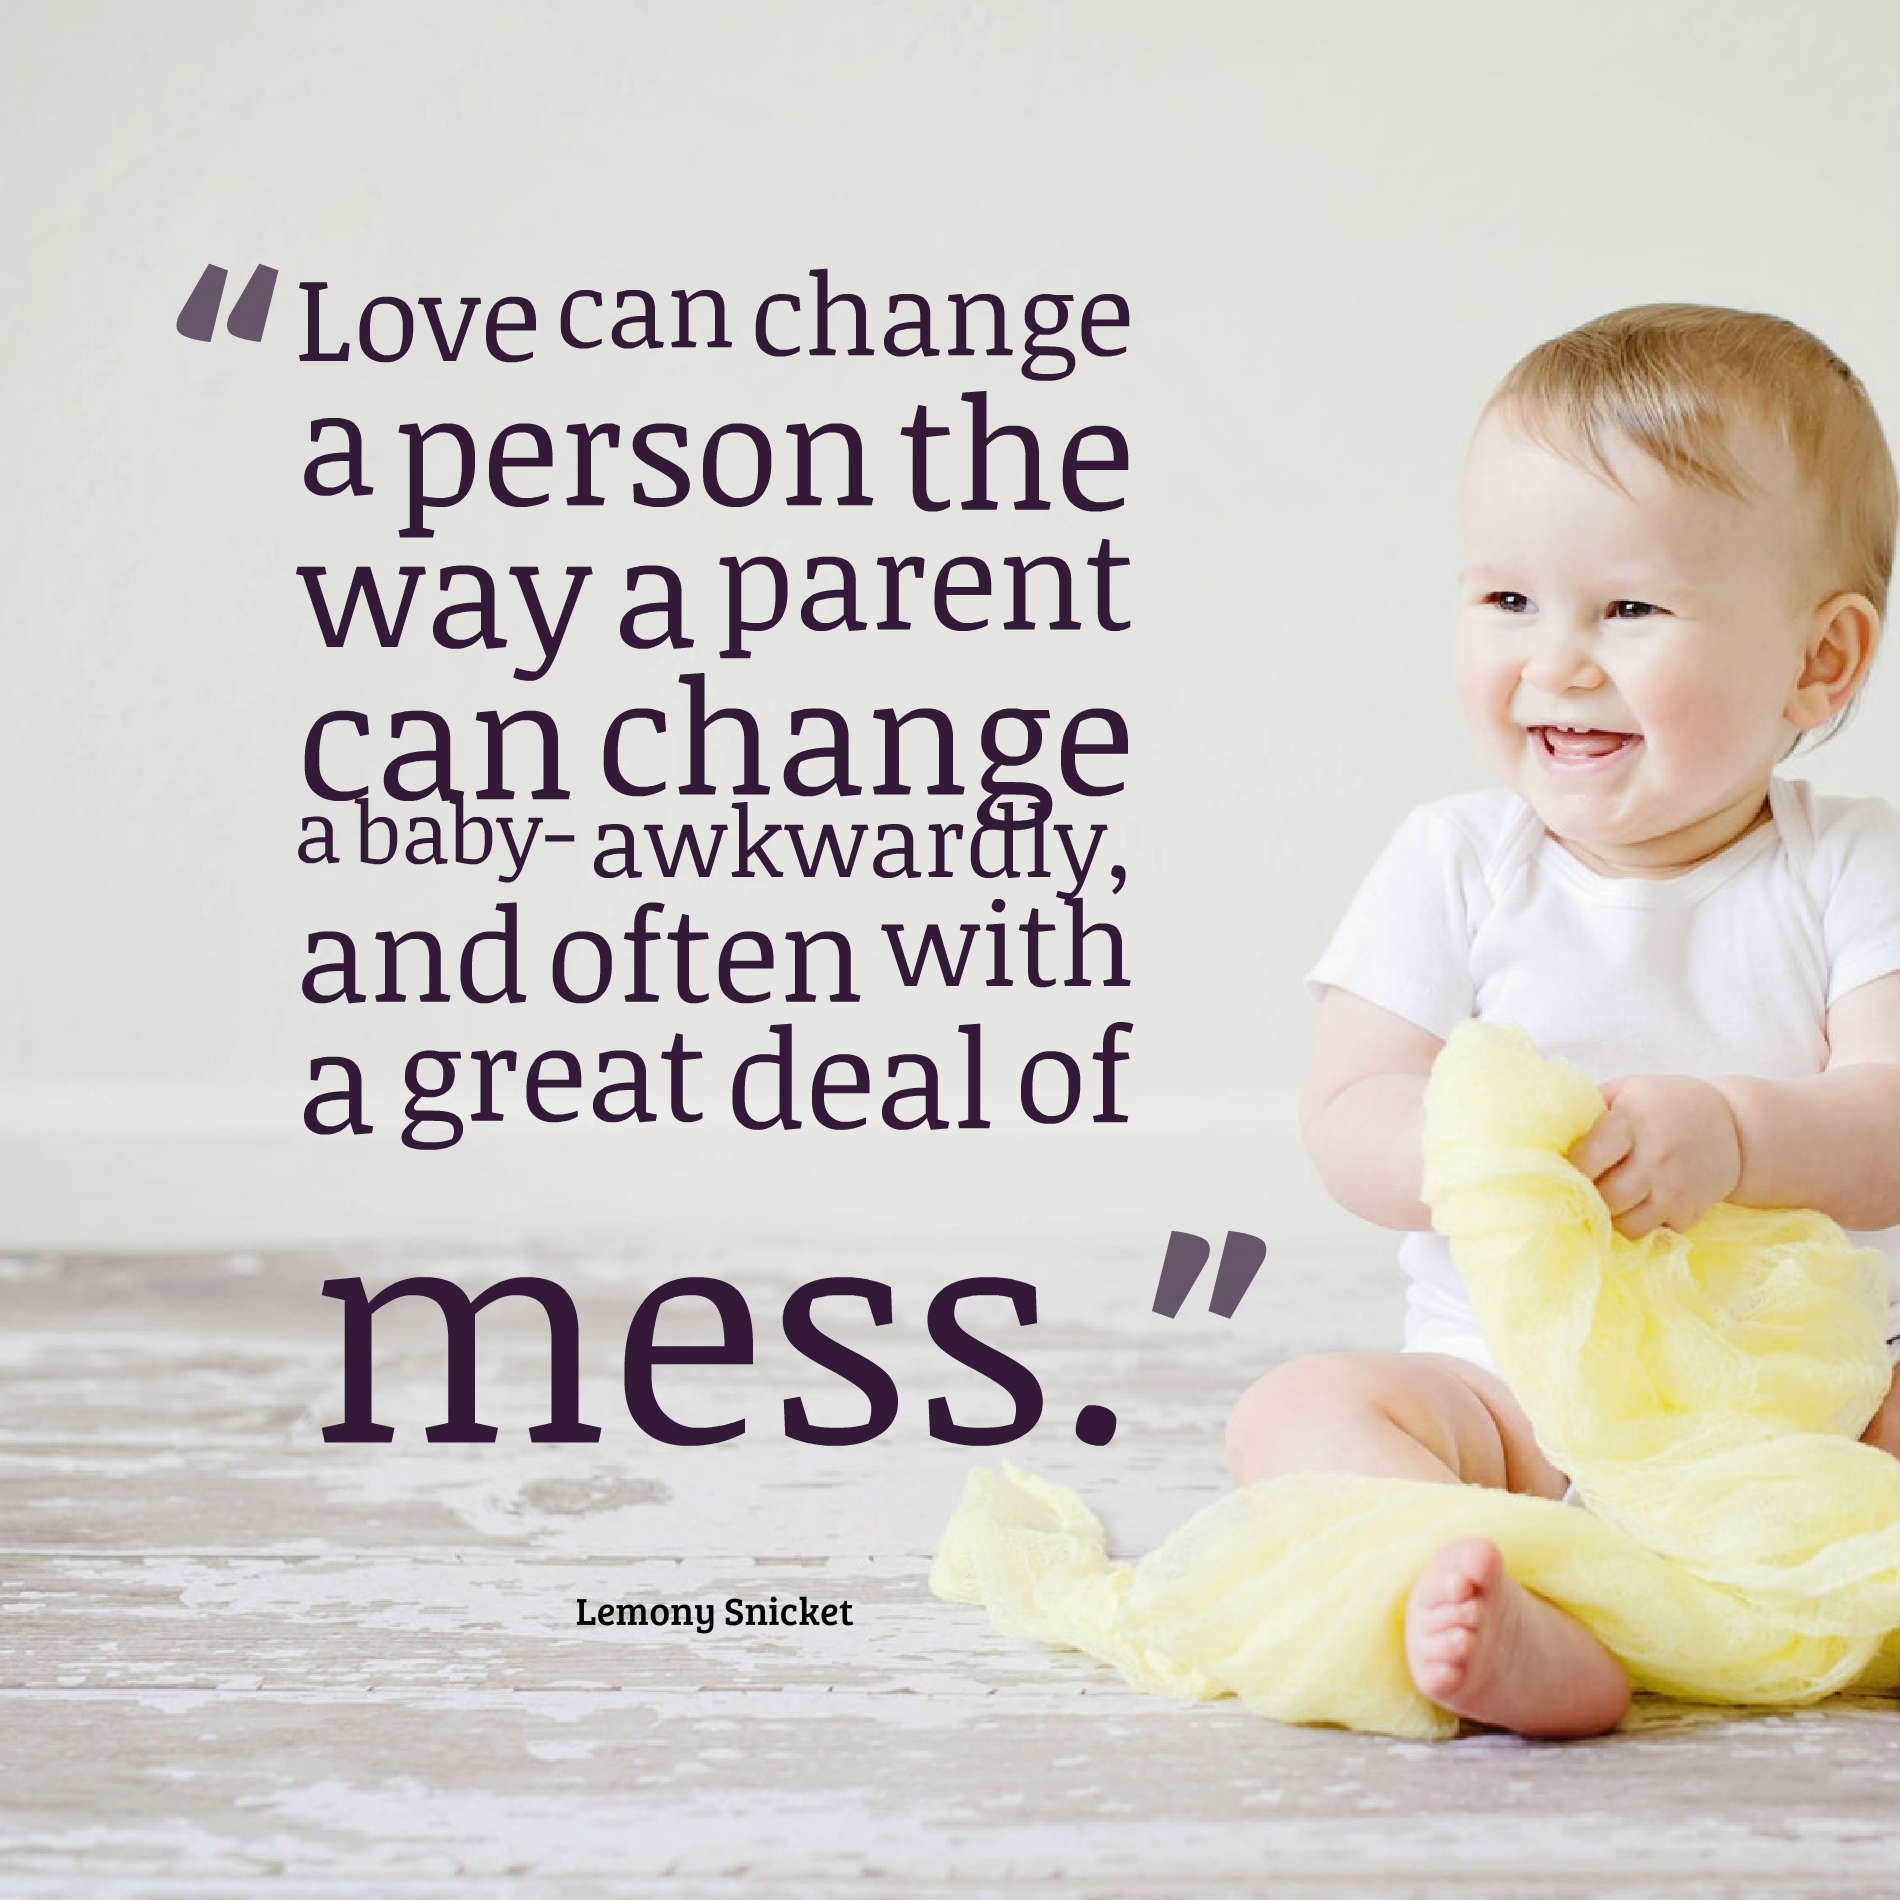 Love can change a person the way a parent can change a baby- awkwardly, and often with a great deal of mess.